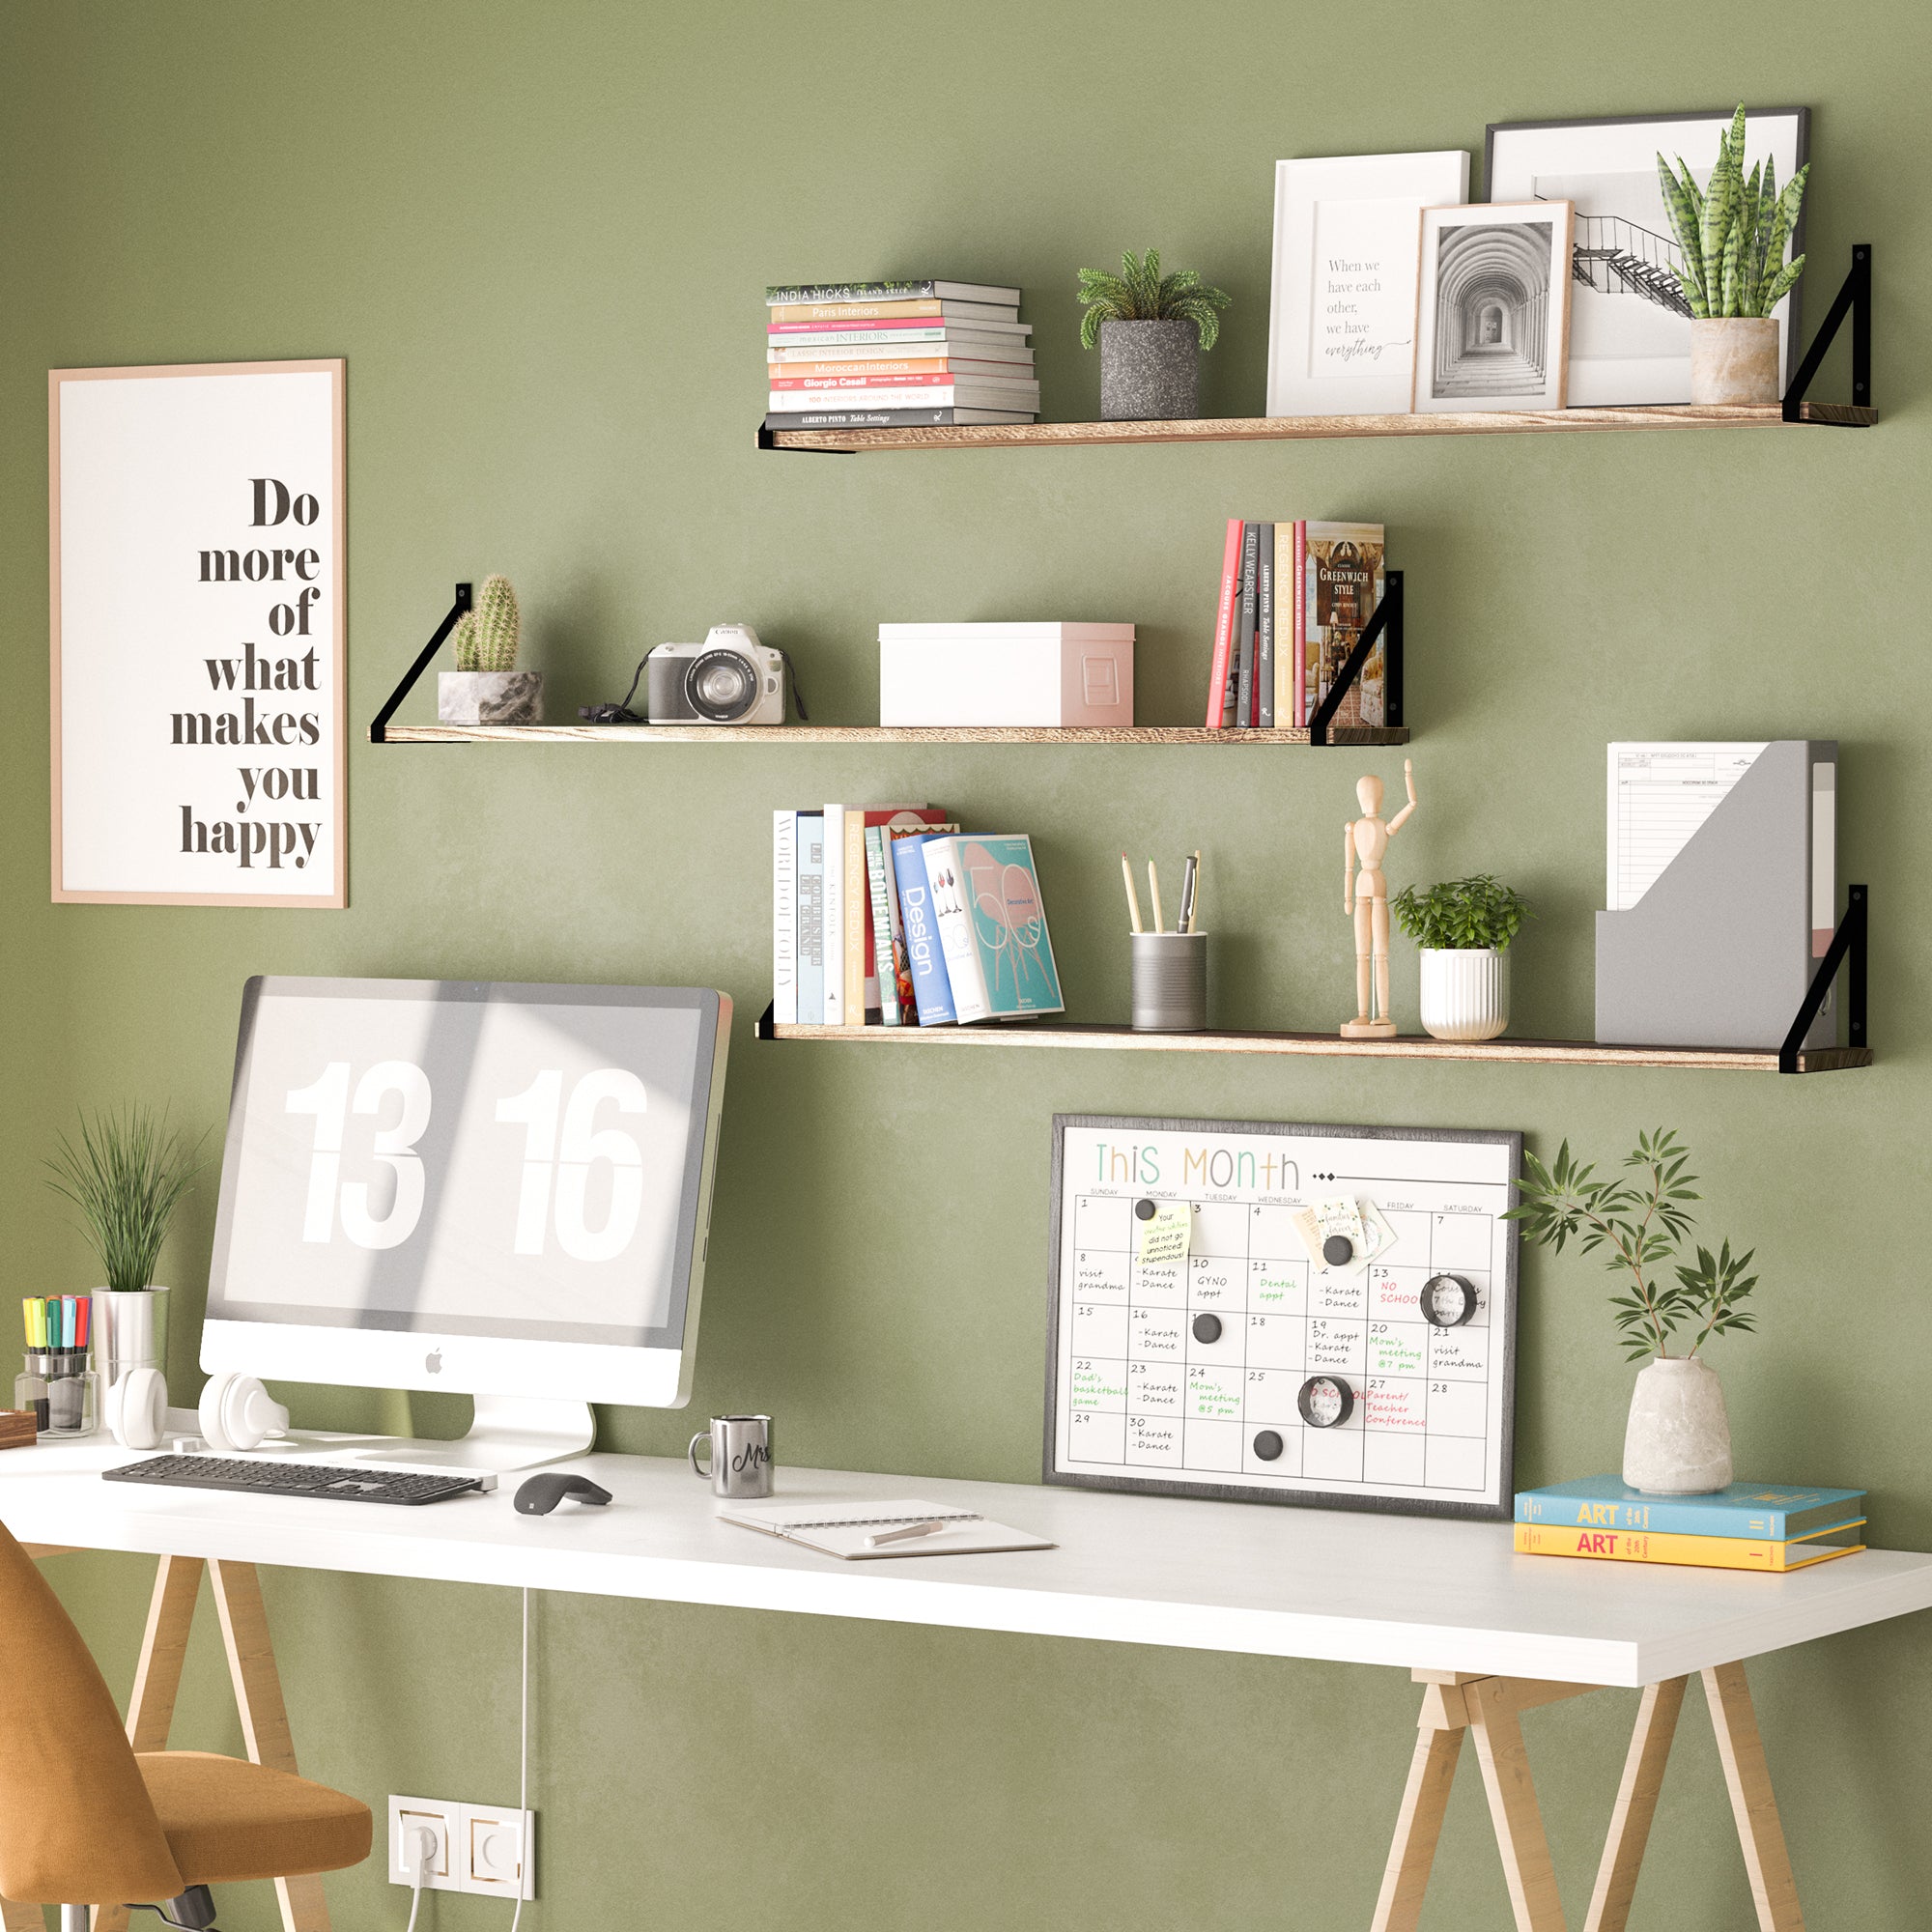 Home office decorated with burnt color office shelves above a desk, organized with books, plants, and personal items.